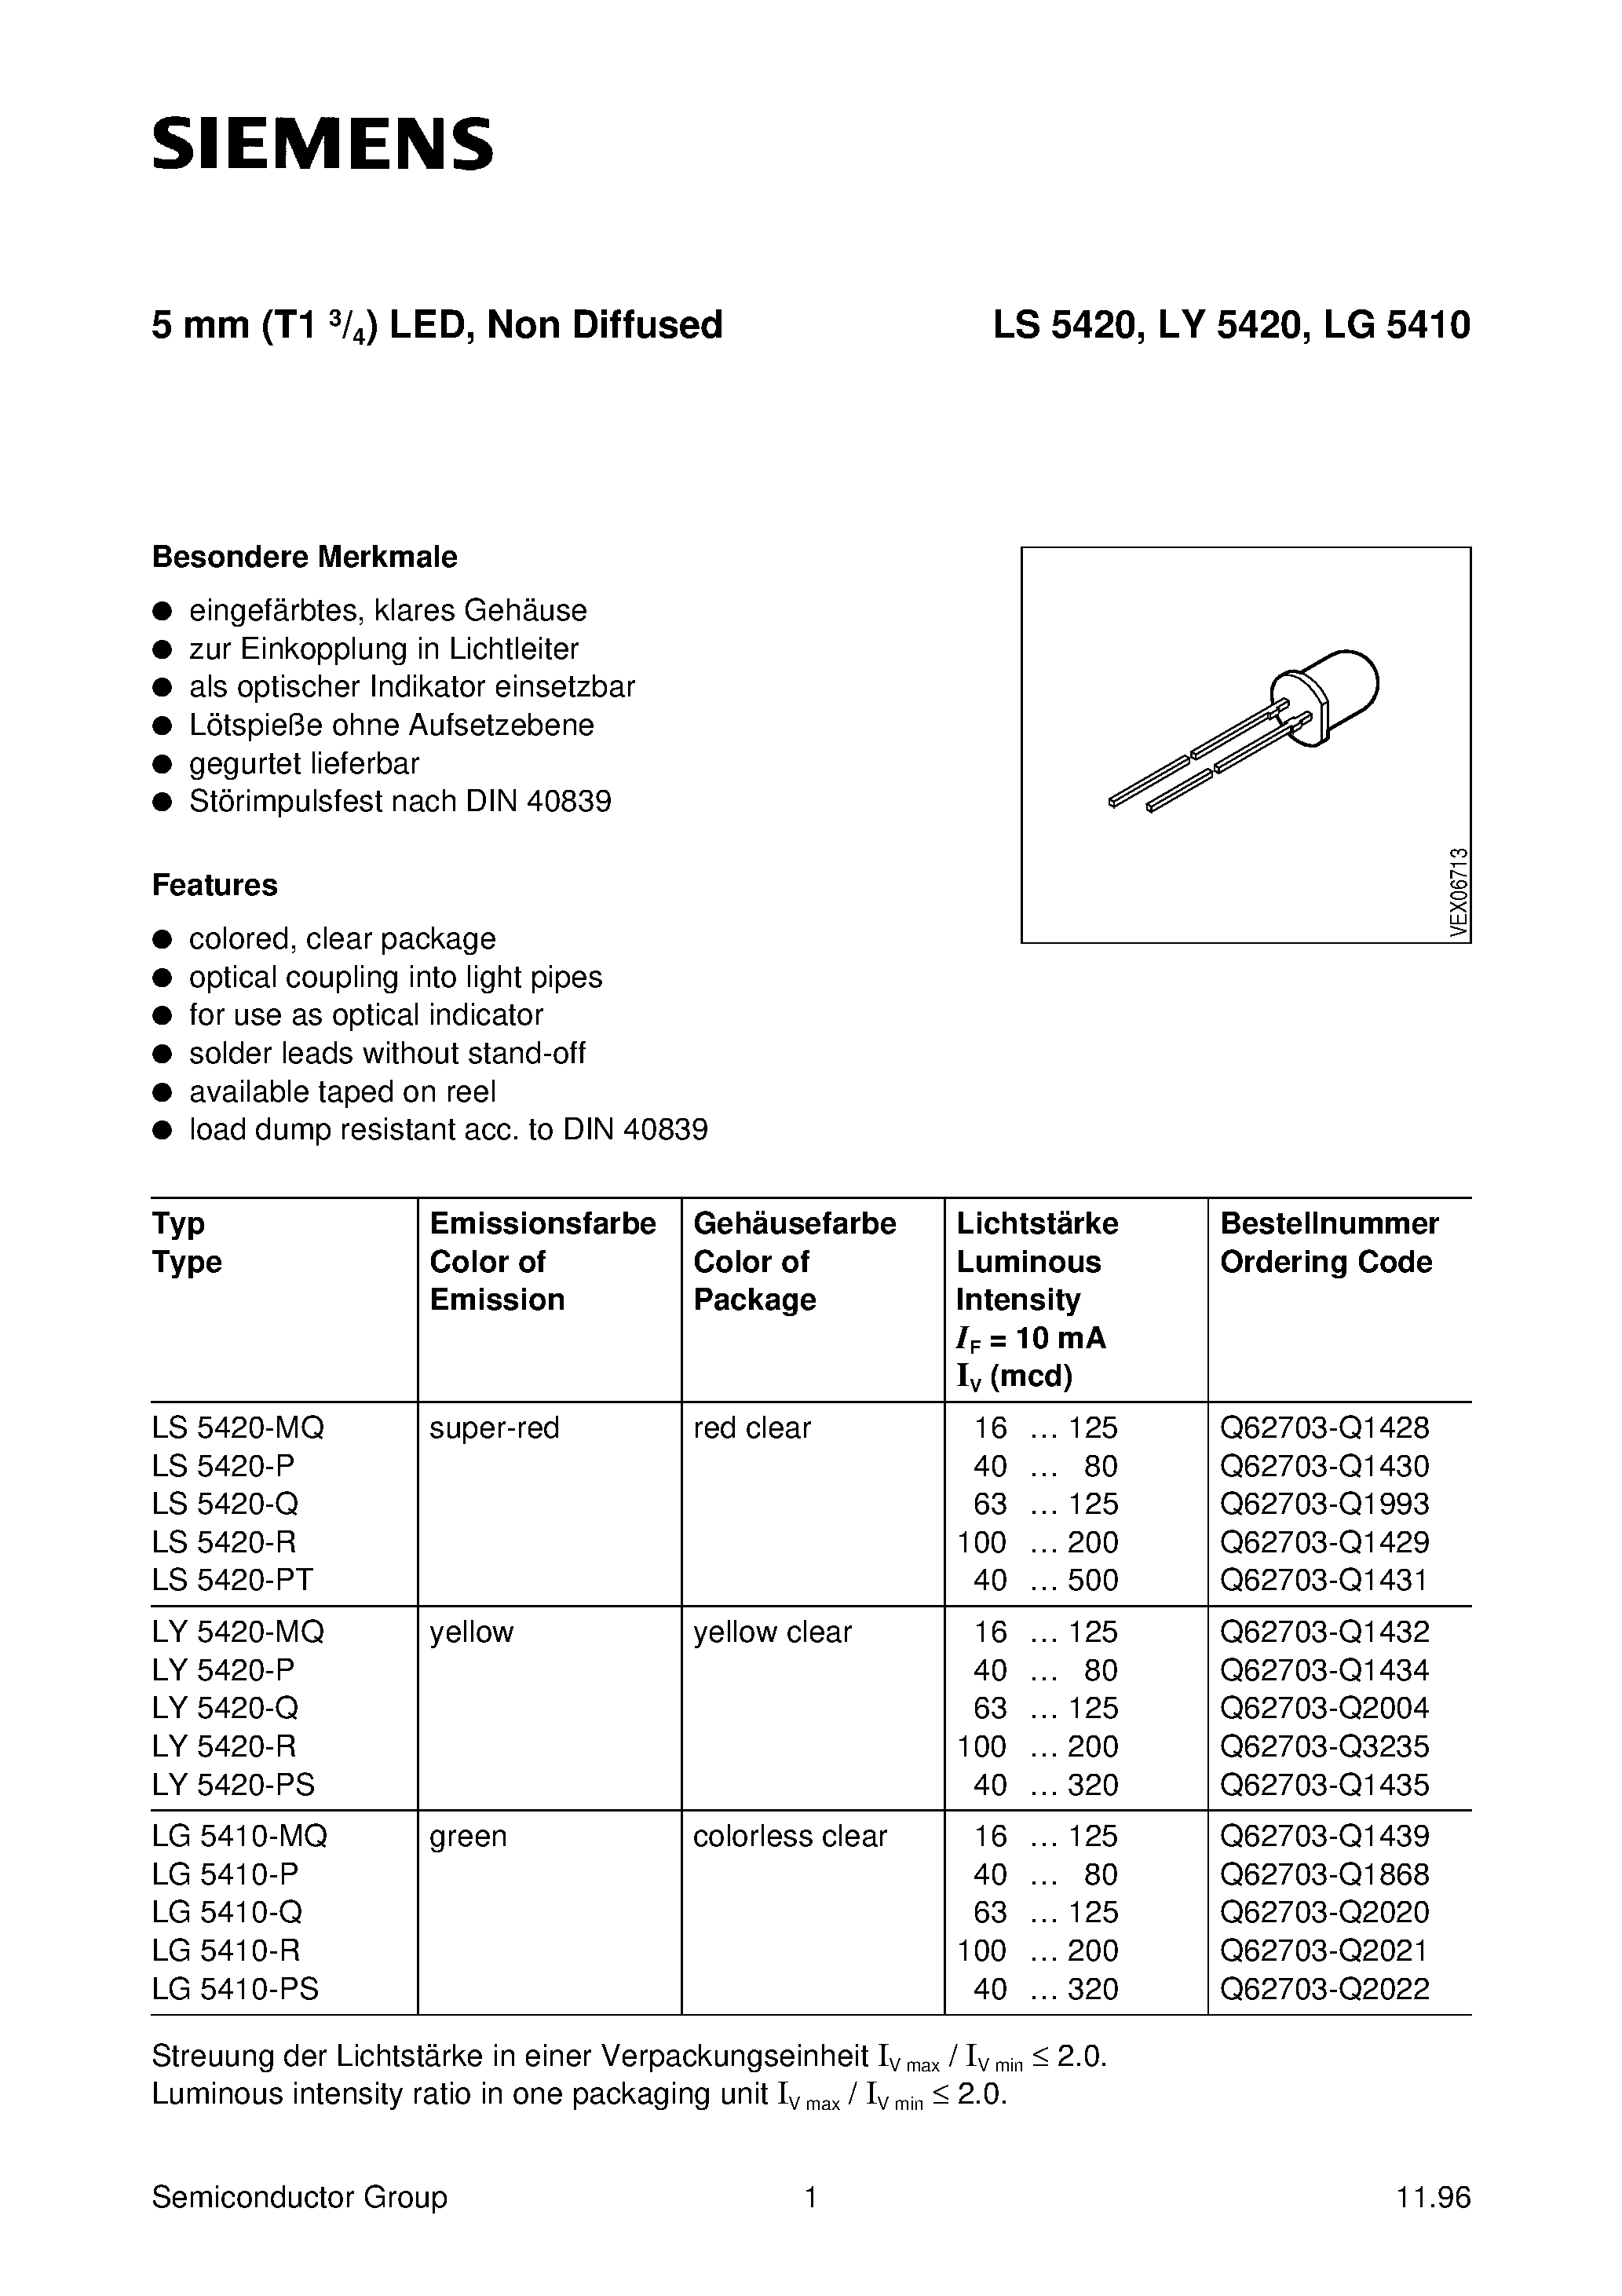 Datasheet LS5420-Q - 5 mm (T1 3/4) LED / Non Diffused page 1